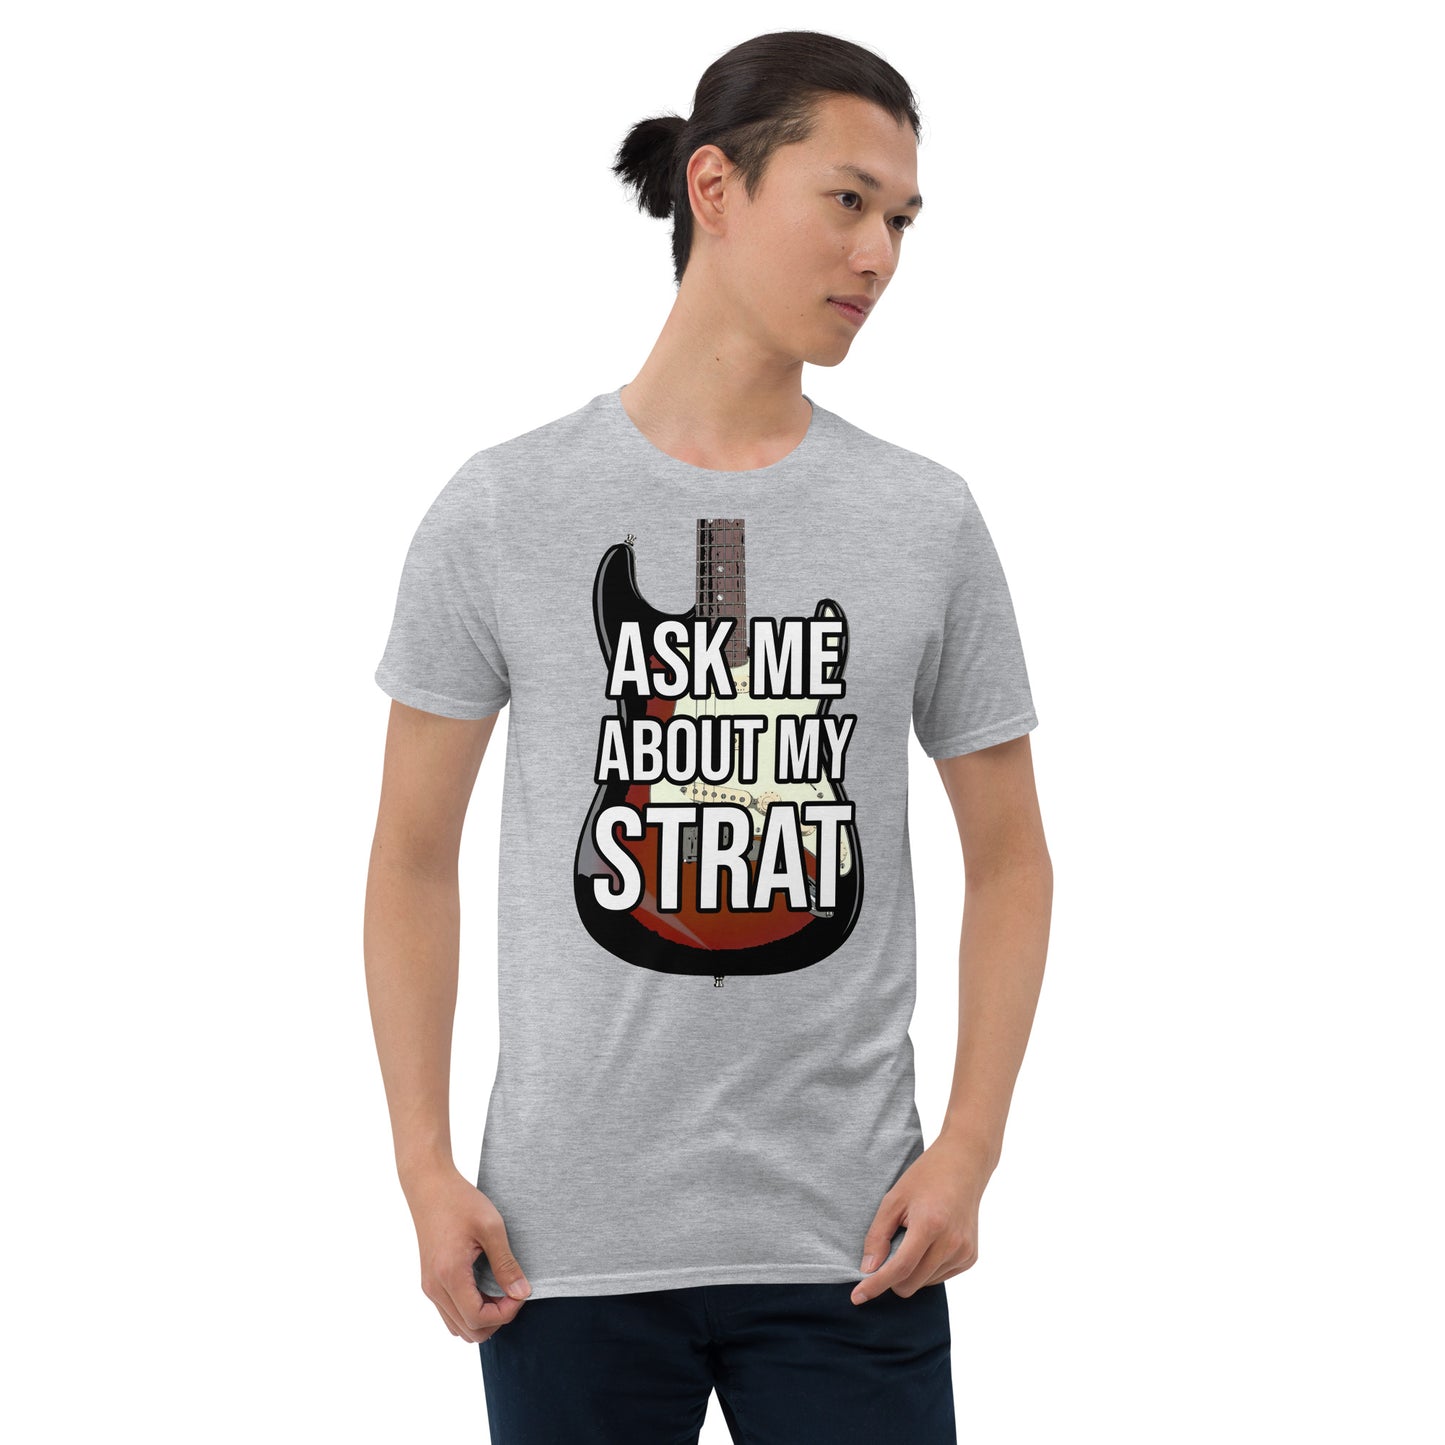 Guitar Please "Ask Me About My Strat" Short-Sleeve Unisex T-Shirt